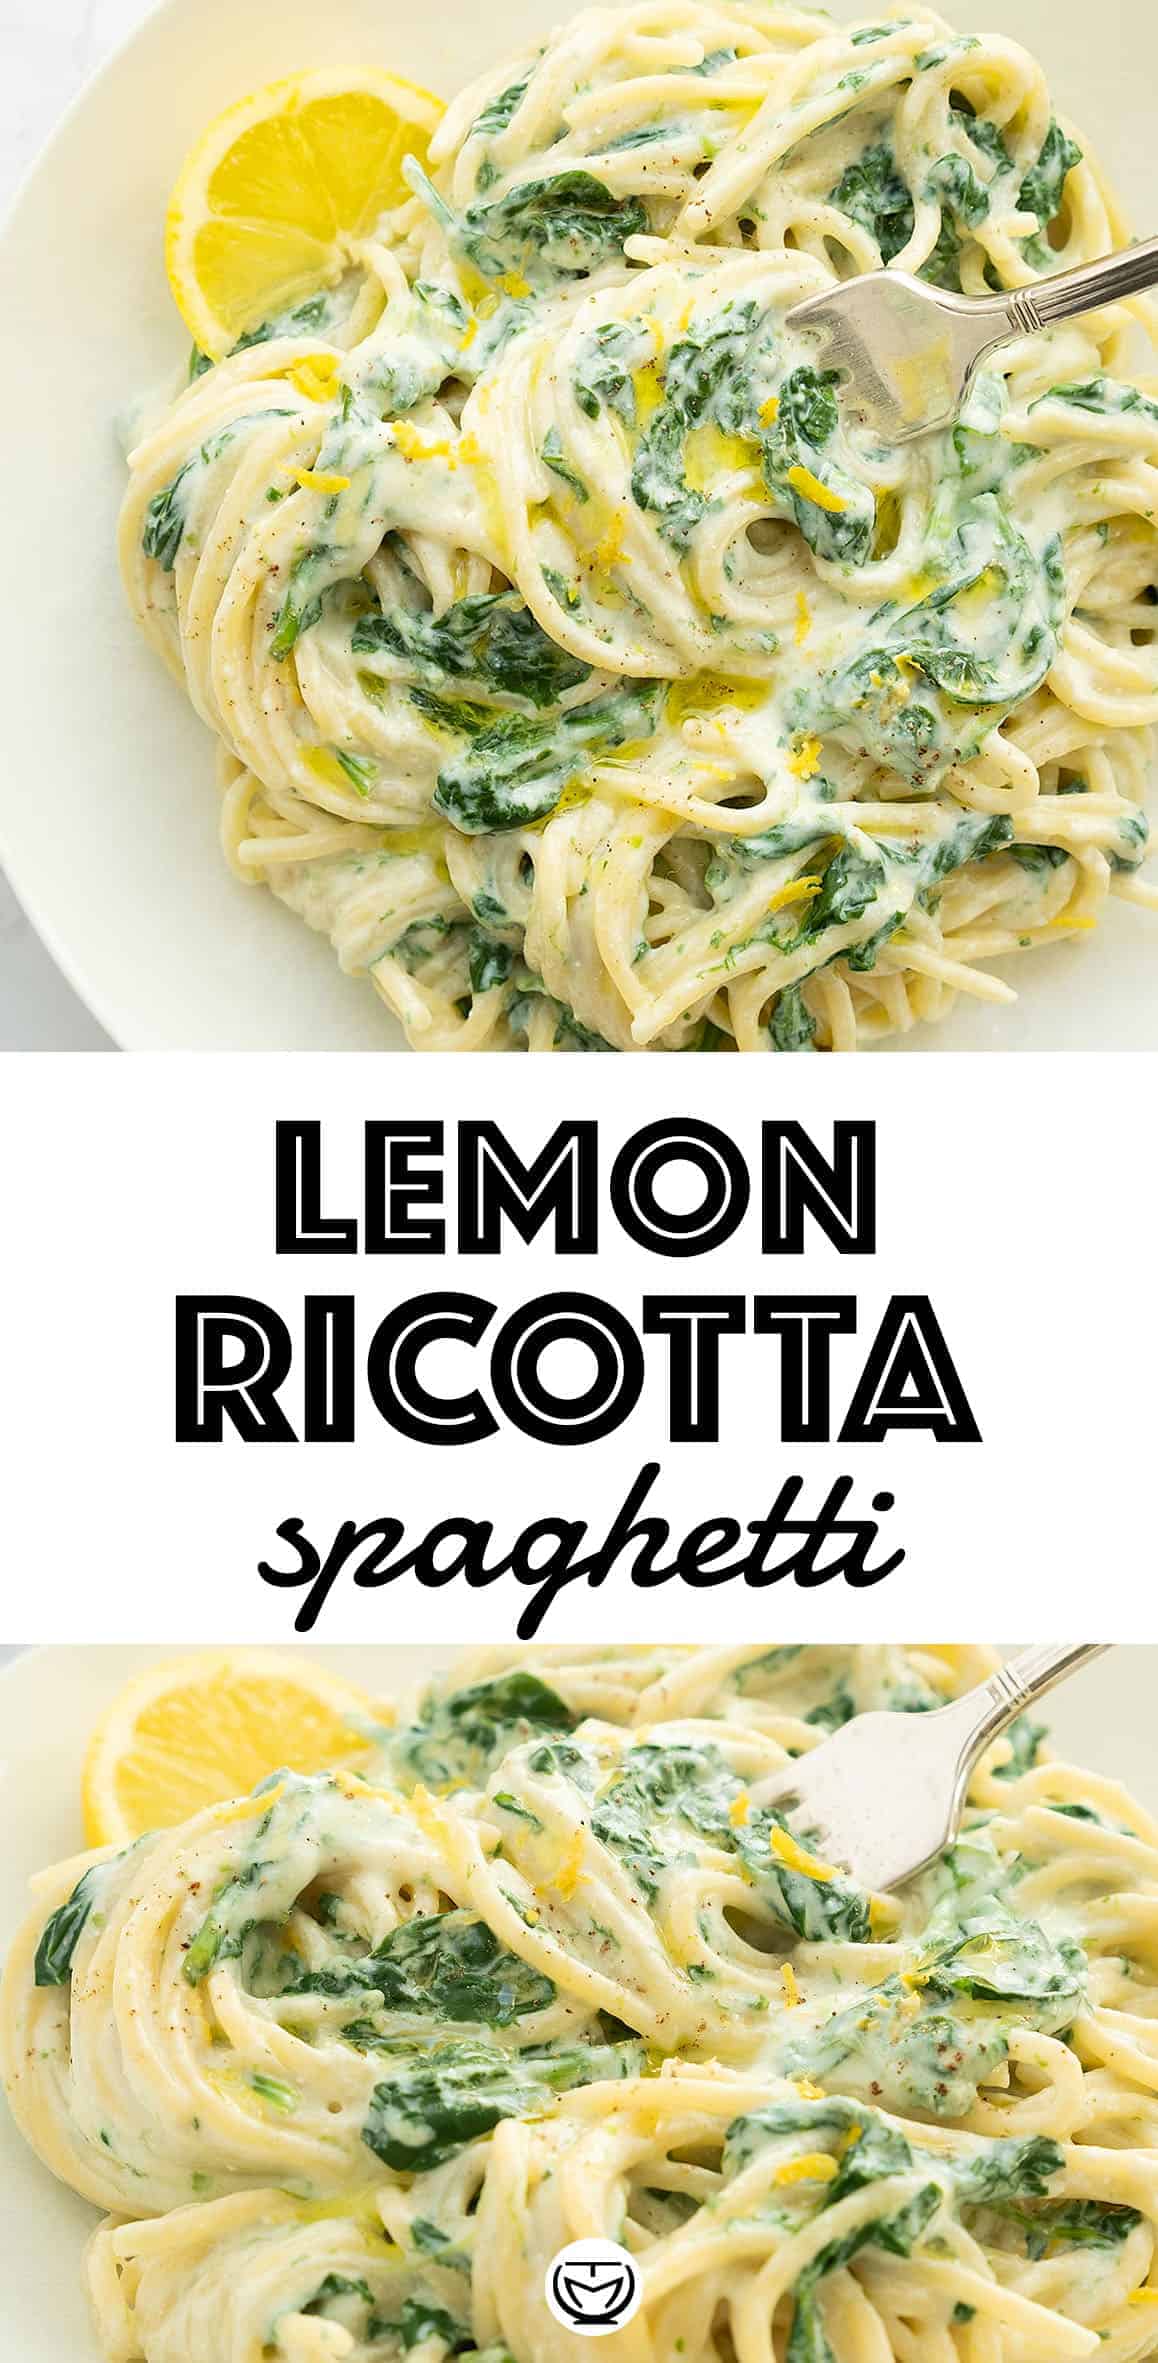 I love this zesty lemon ricotta pasta with spinach, it makes a delish weeknight meal ready in less than 15 minutes. Simple, fresh ingredients, delicious flavor, and minimal effort. #pastarecipes #spaghetti #easyrecipes #quickmeals